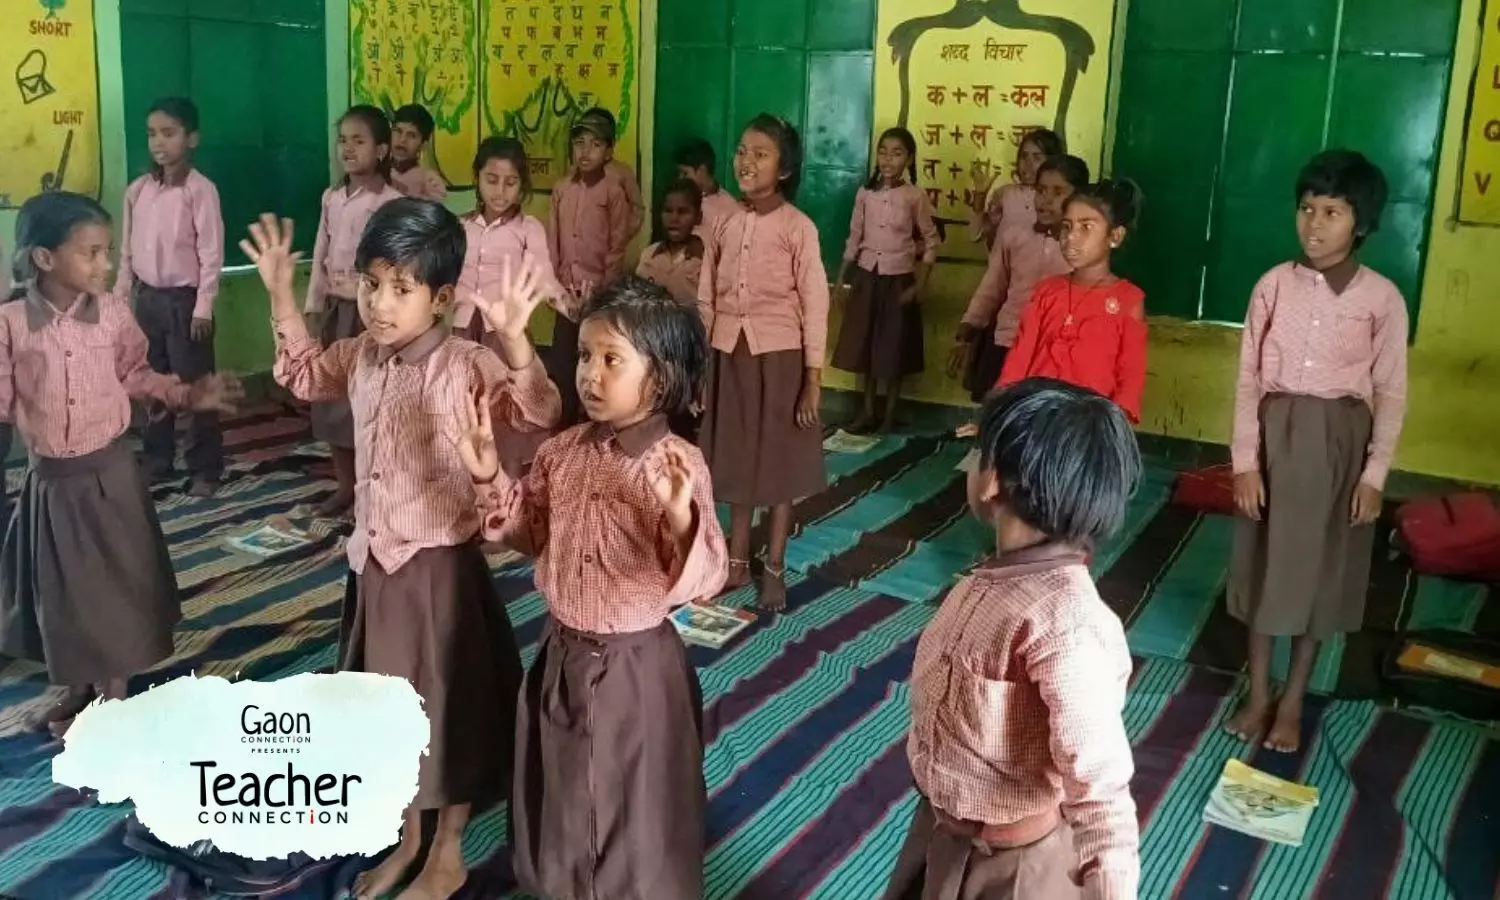 A teacher posted in a Naxalite-affected area transforms the village school, wins community’s trust